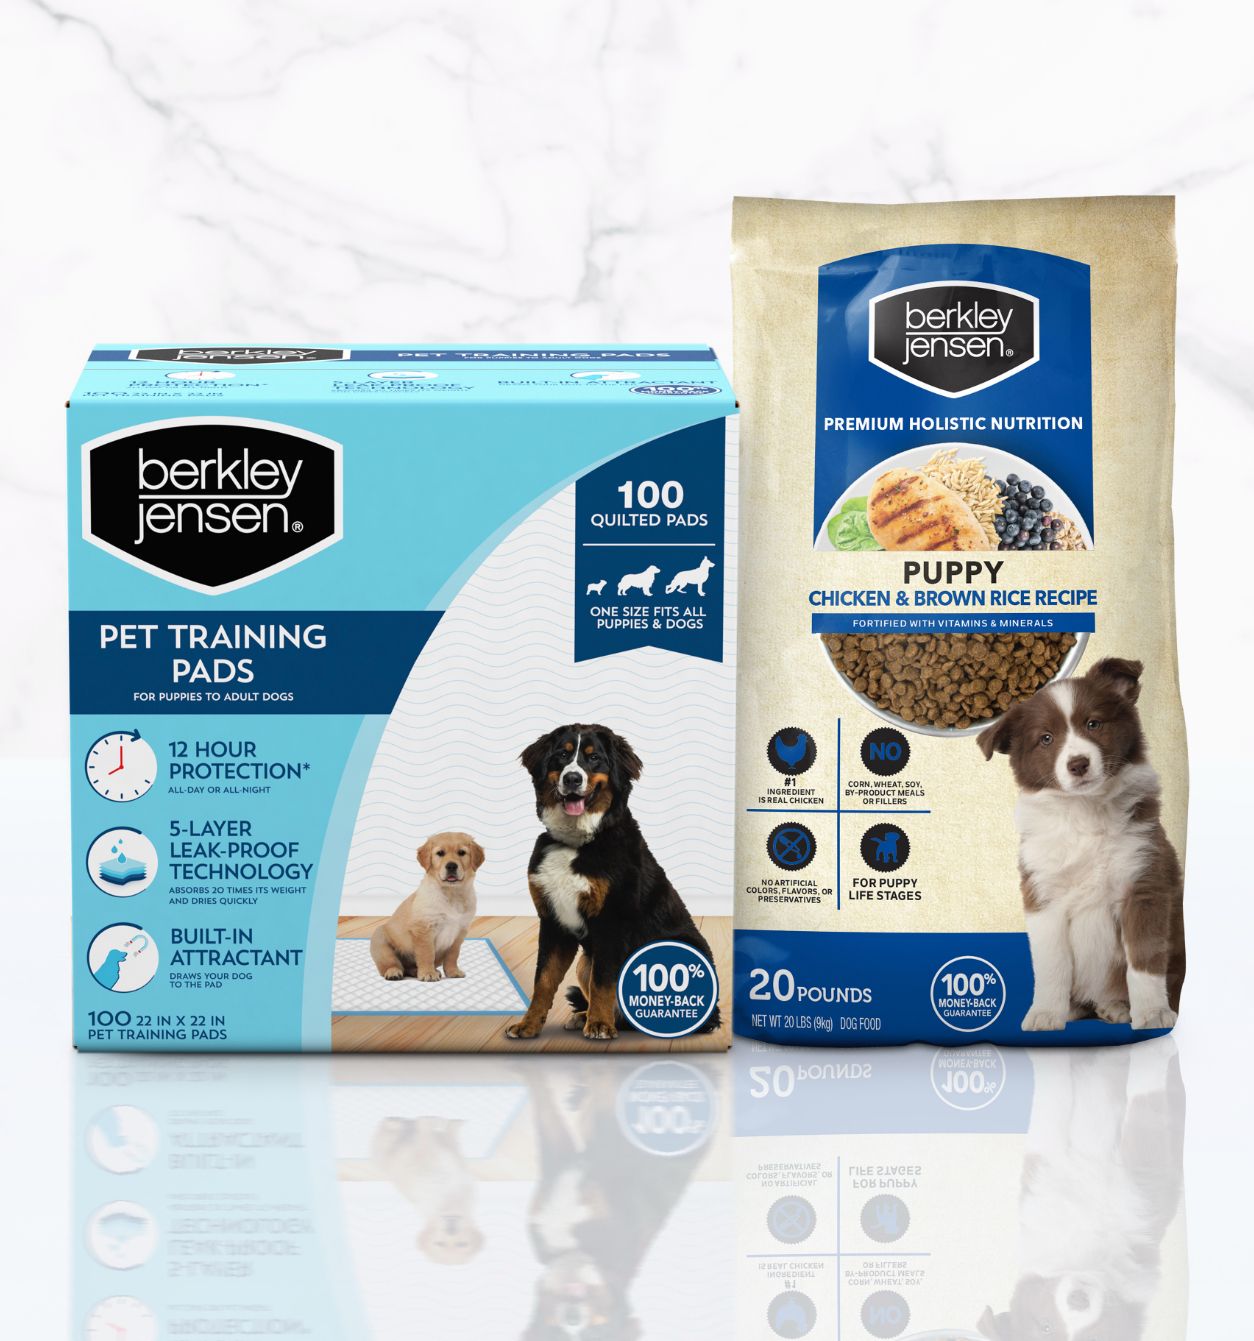 photo of berkley jensen pet training pads next to puppy chicken and brown rice dog food on marble background